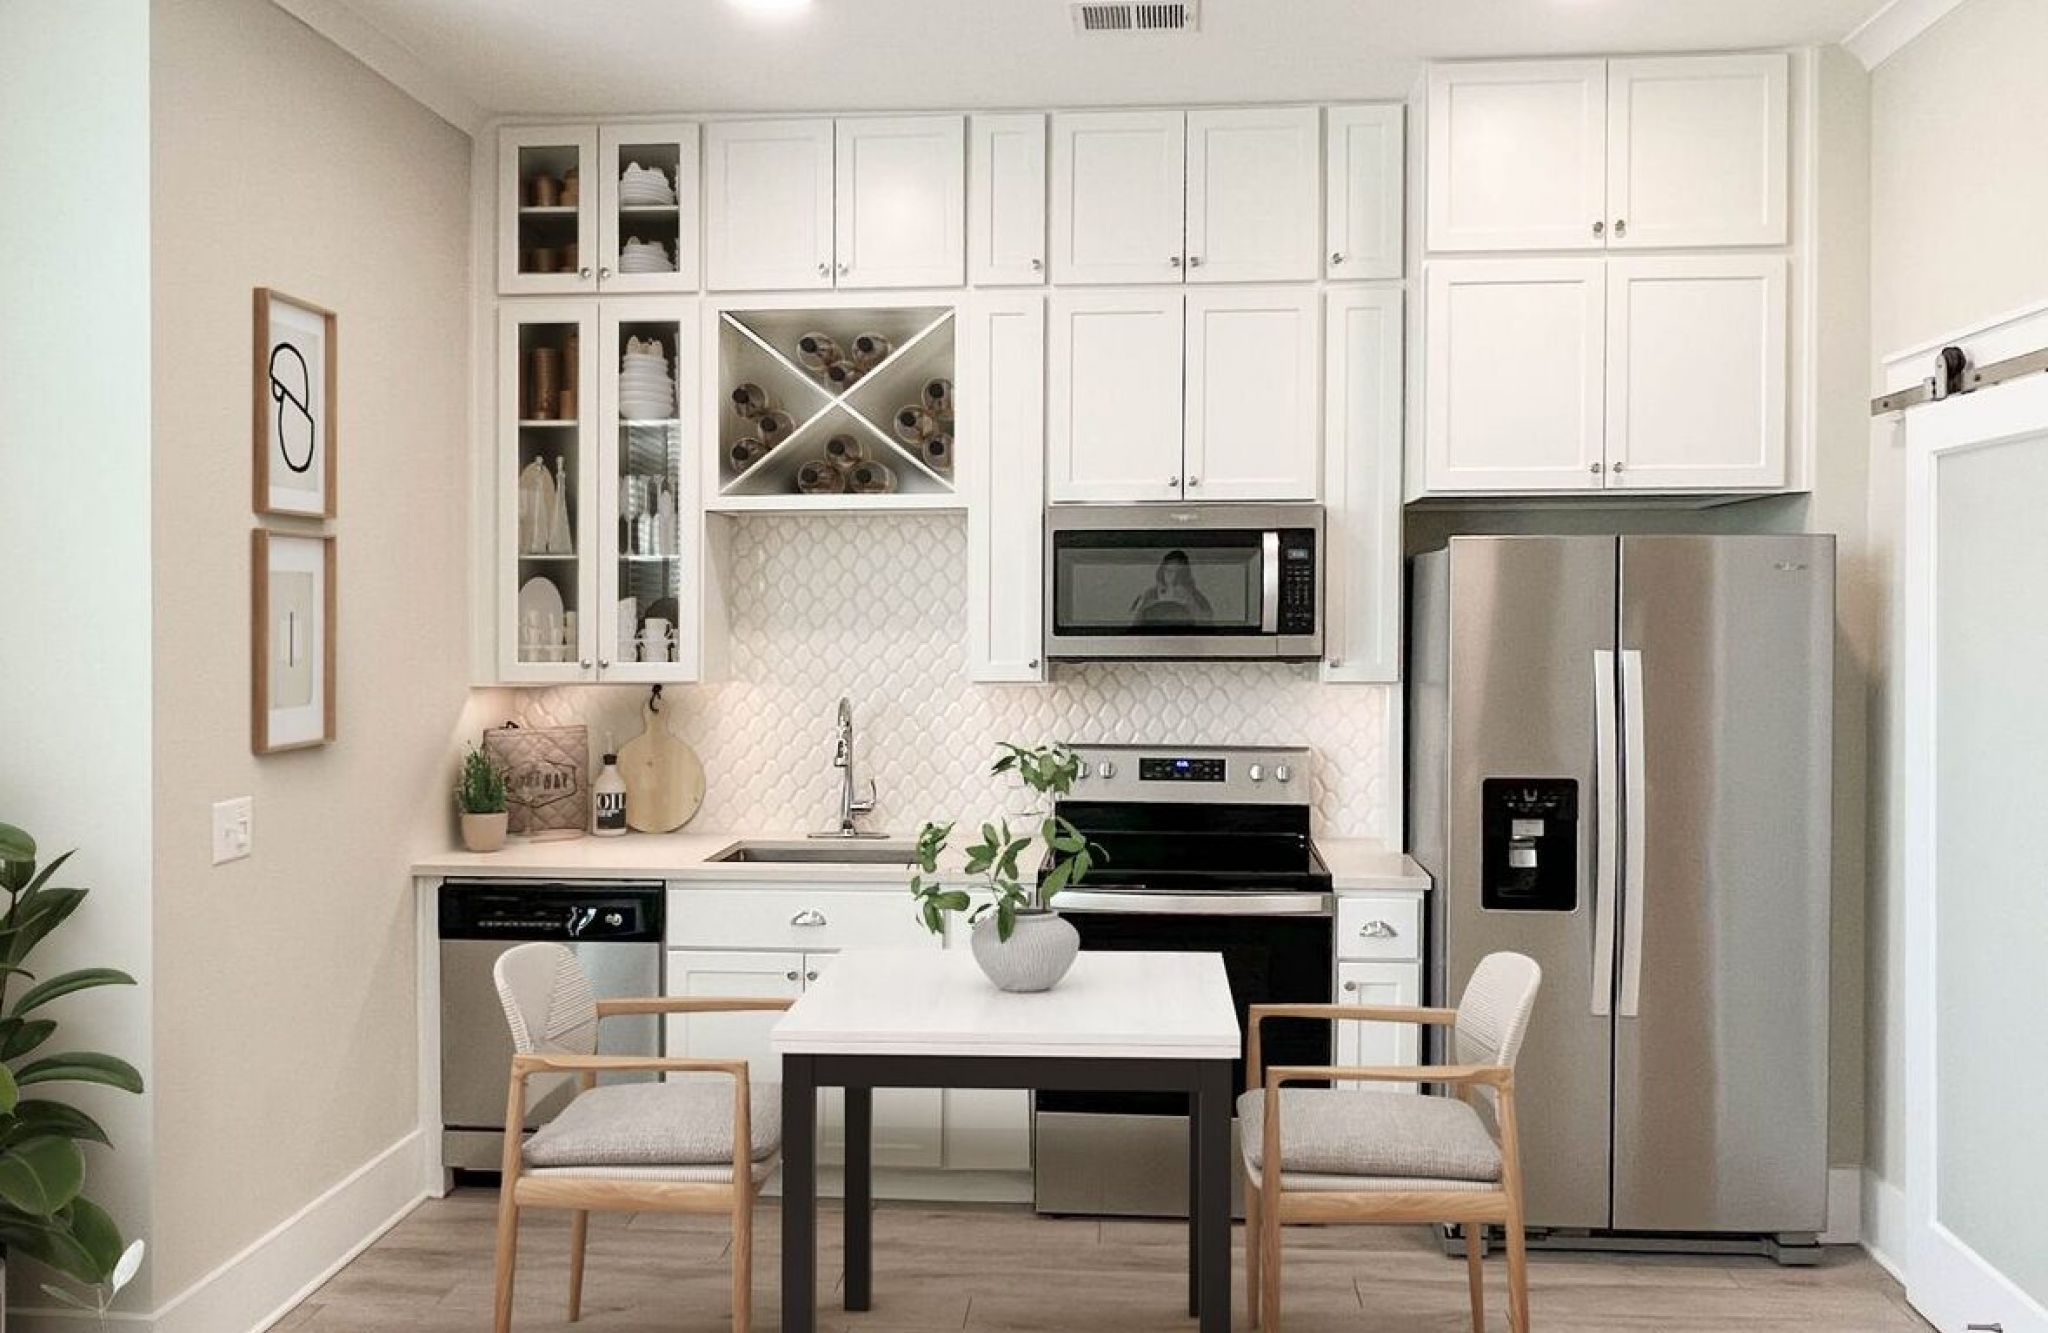 Studio apartment kitchen with stainless steel appliances, built-in wine storage, and small dining table